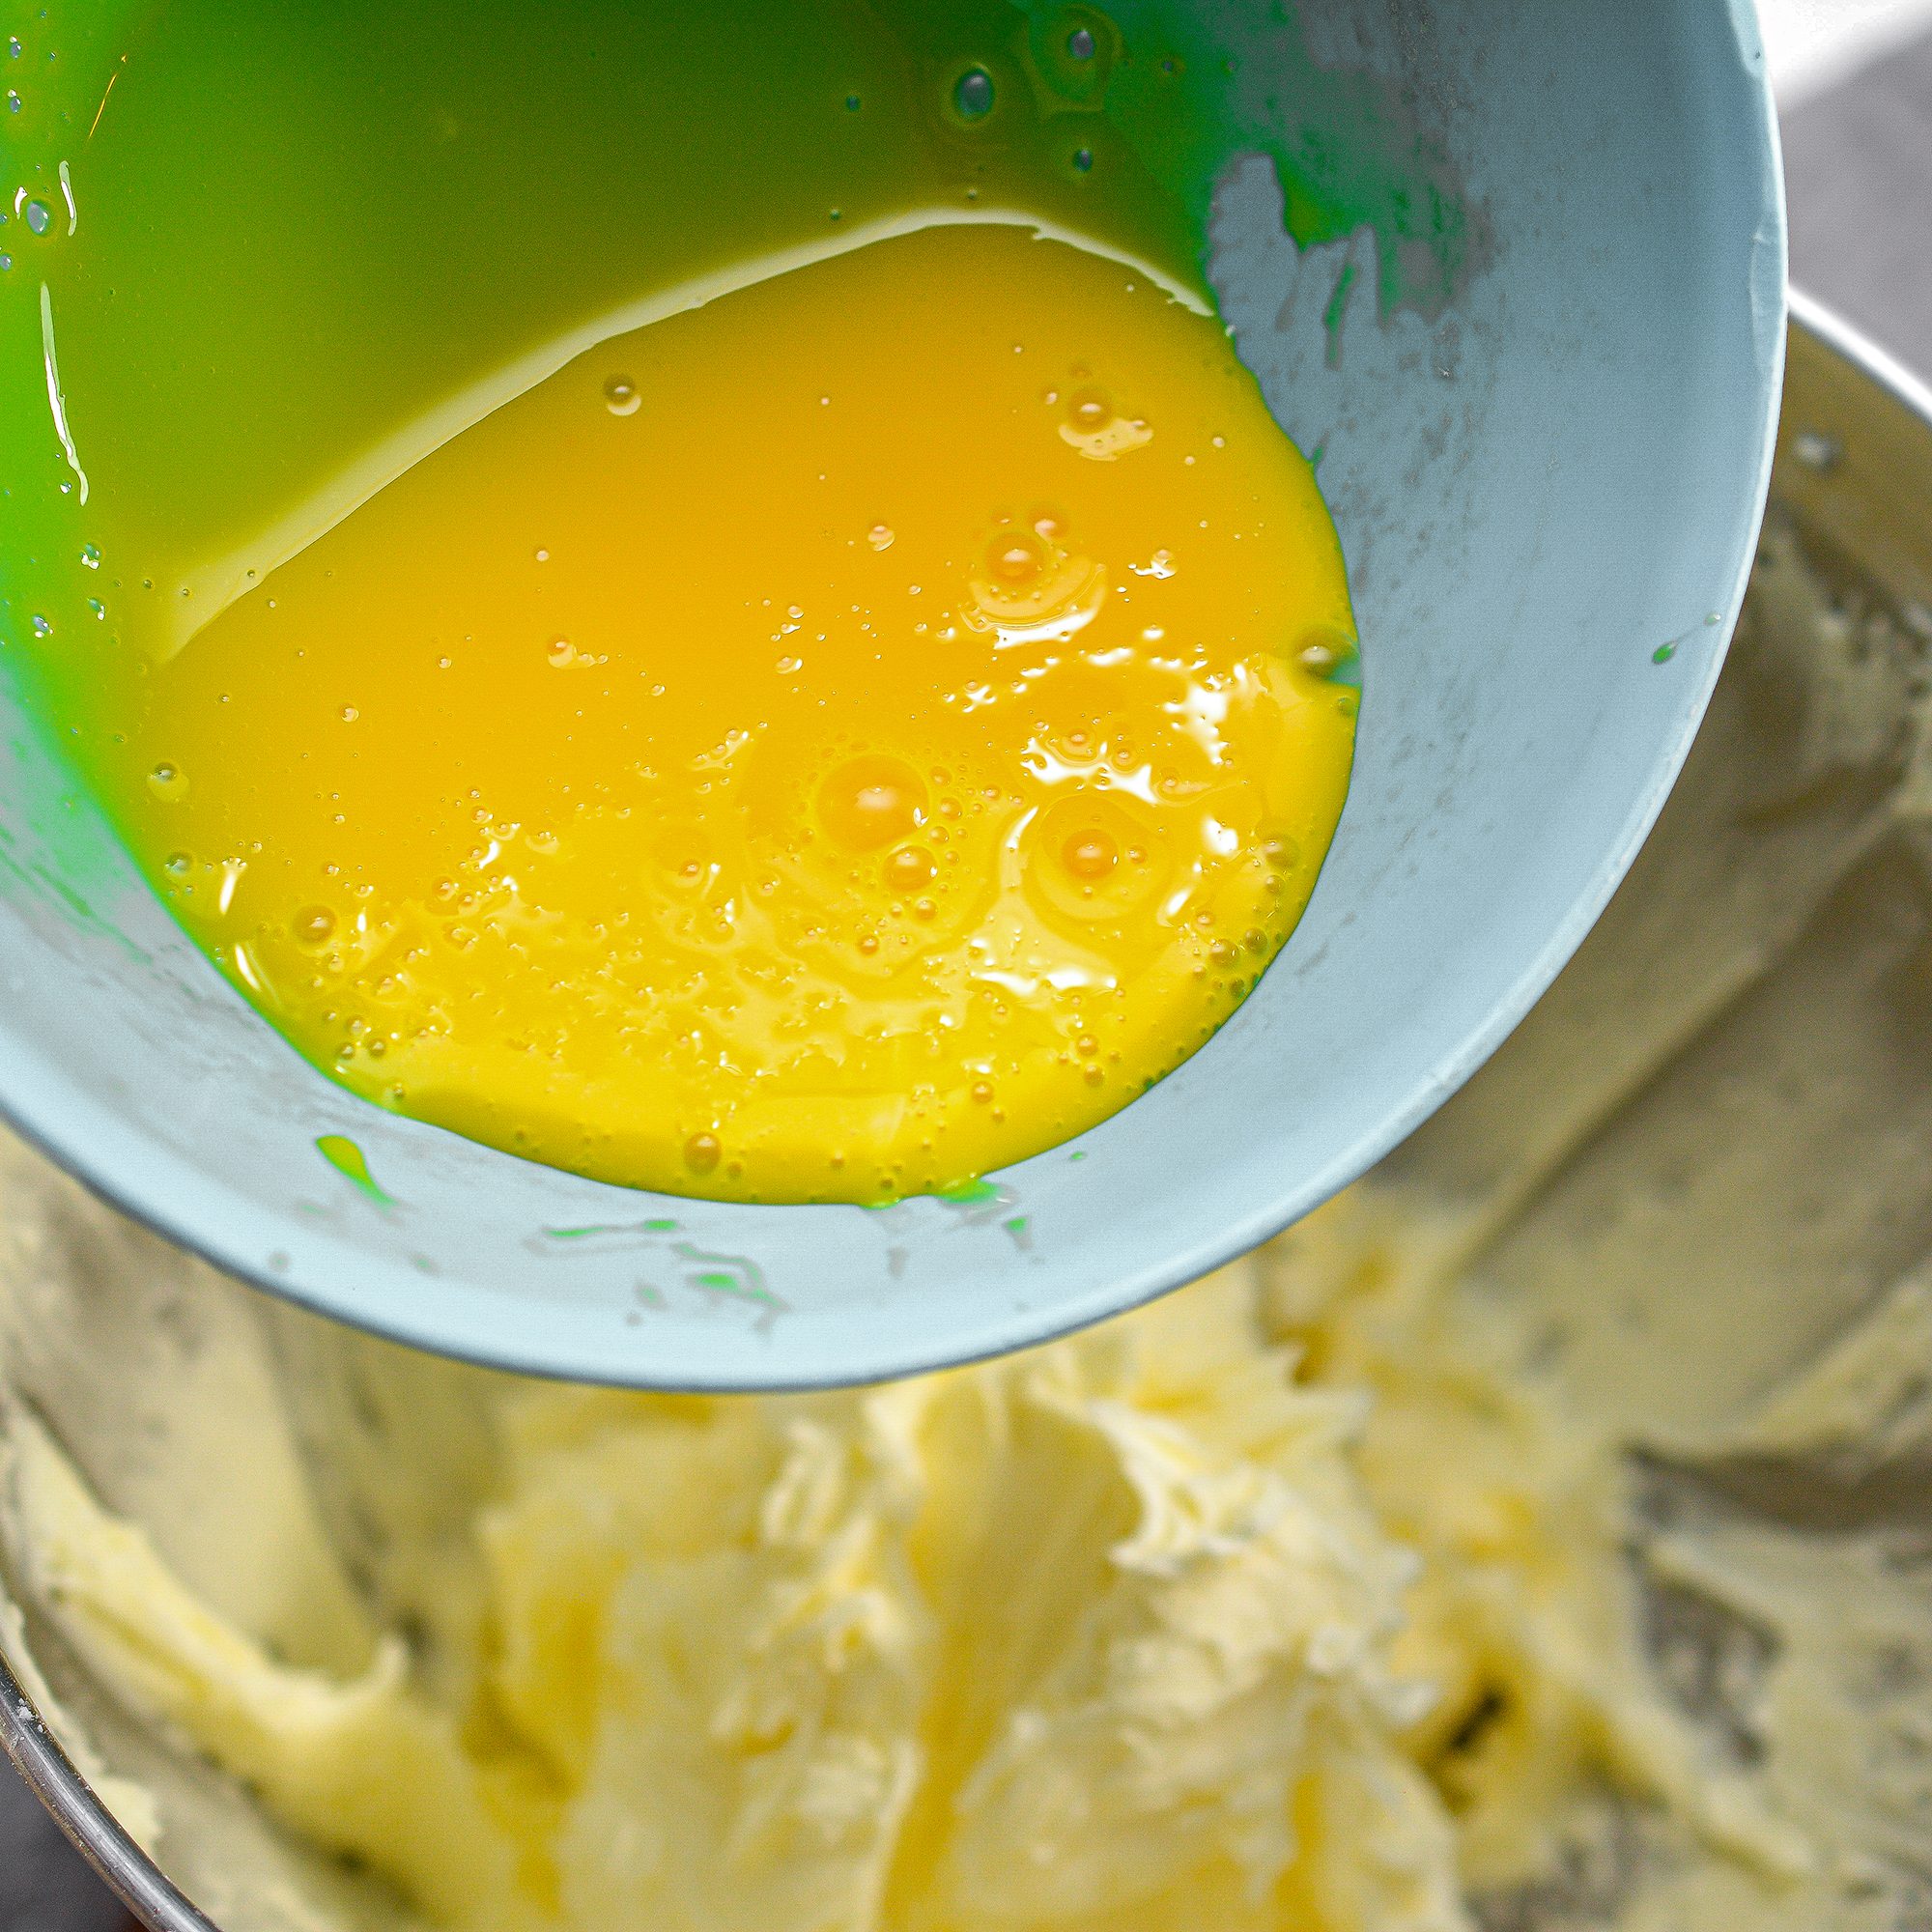 Mix in the egg yolks.